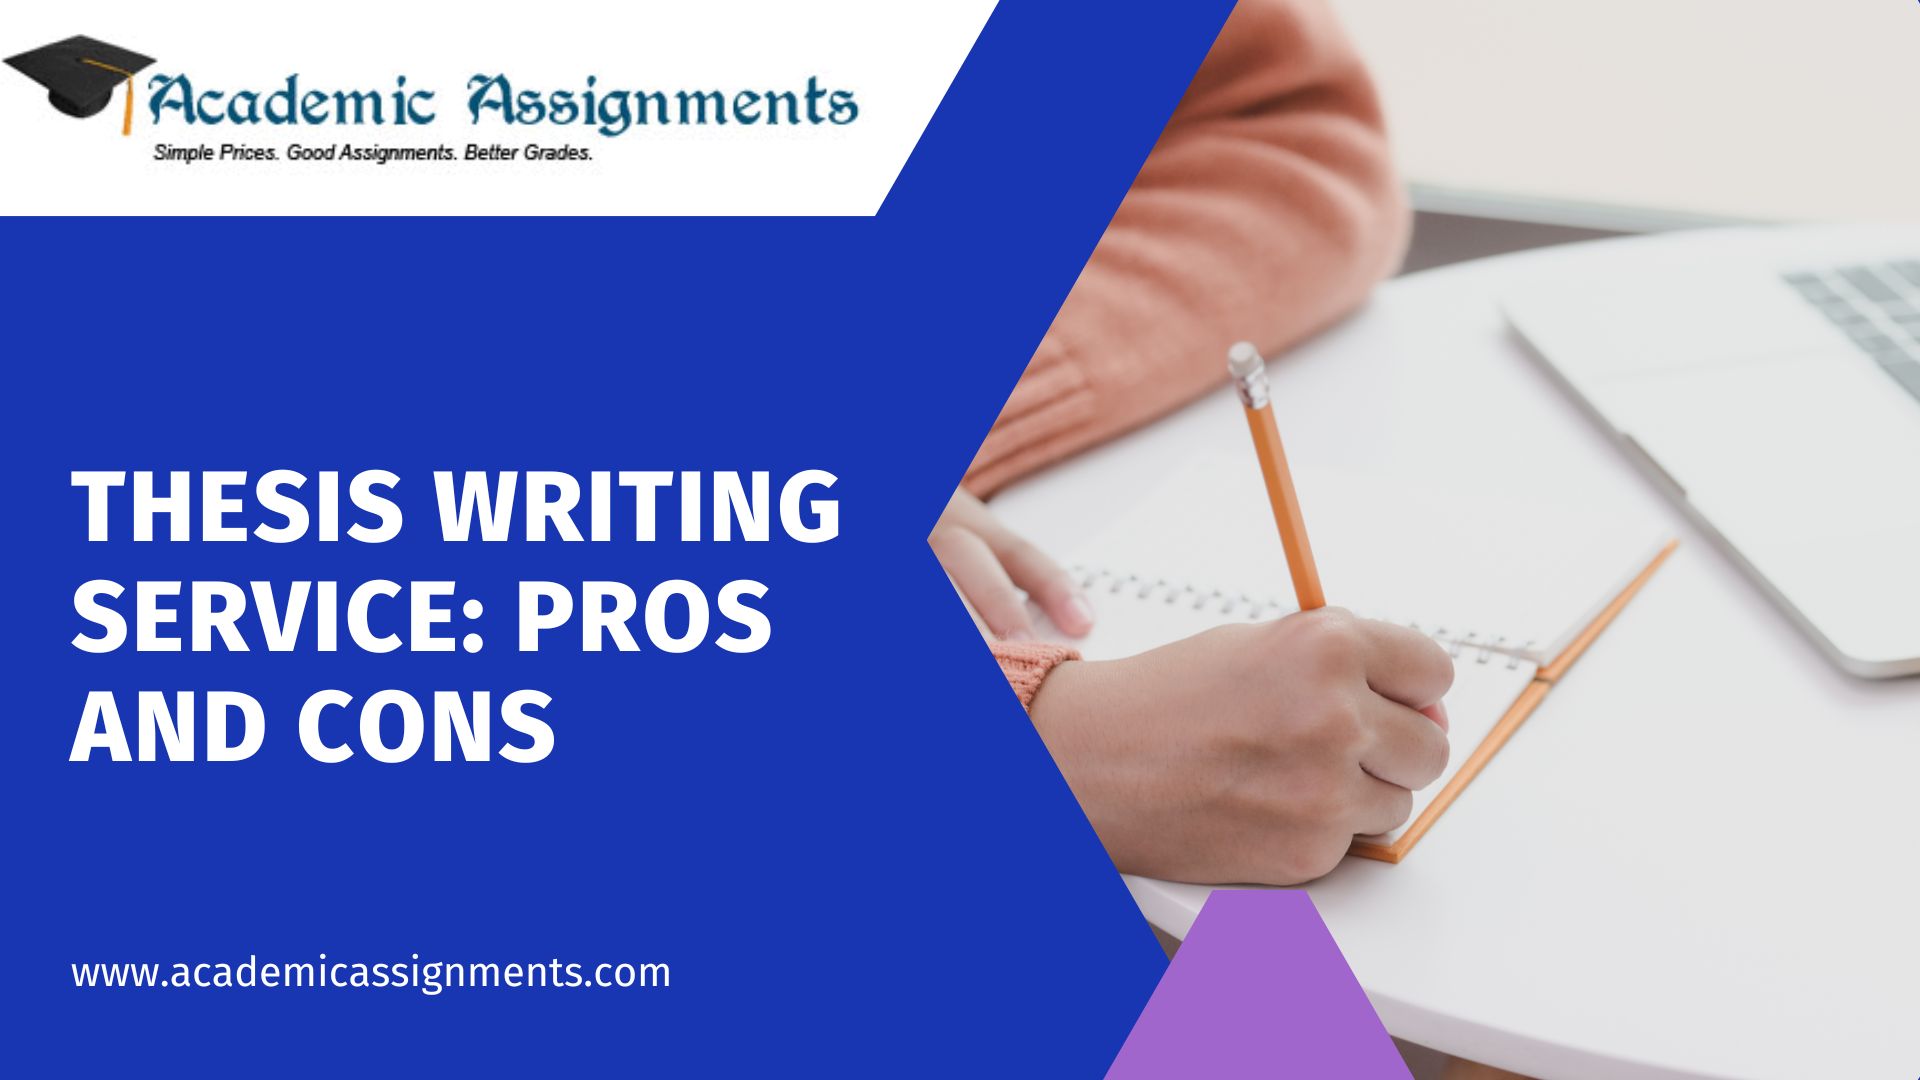 Thesis Writing Service: PROS AND CONS